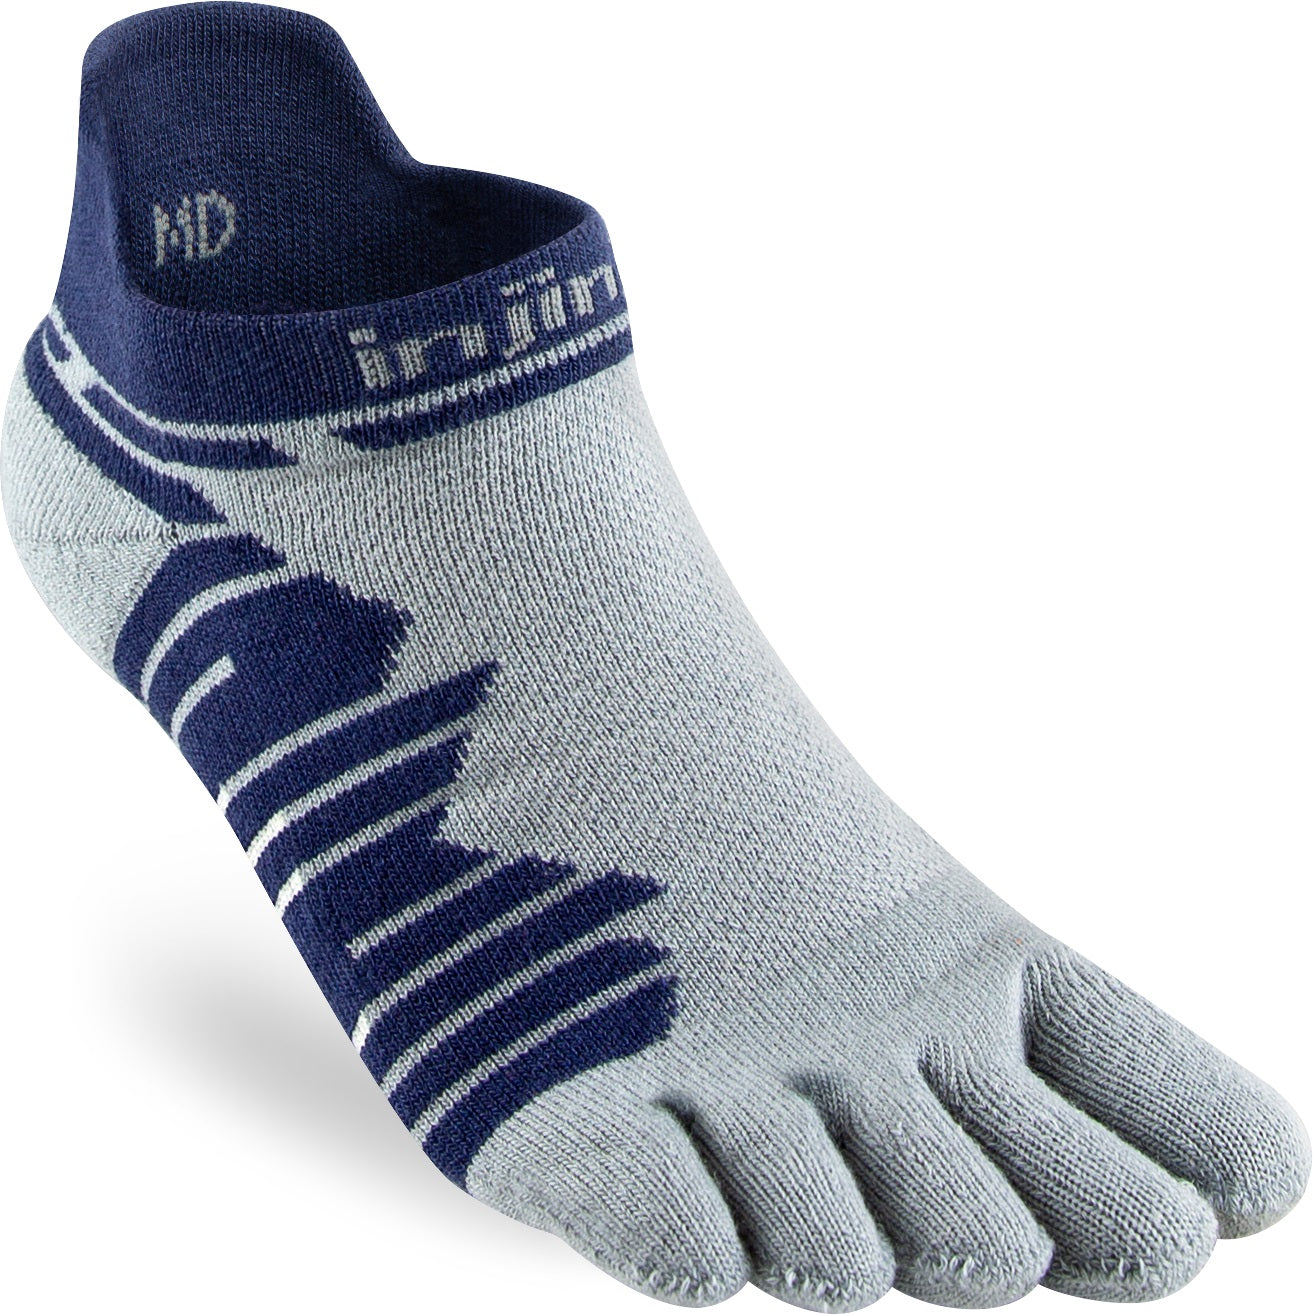 This Will Help You Choose Your Injinji Toesocks - Blister